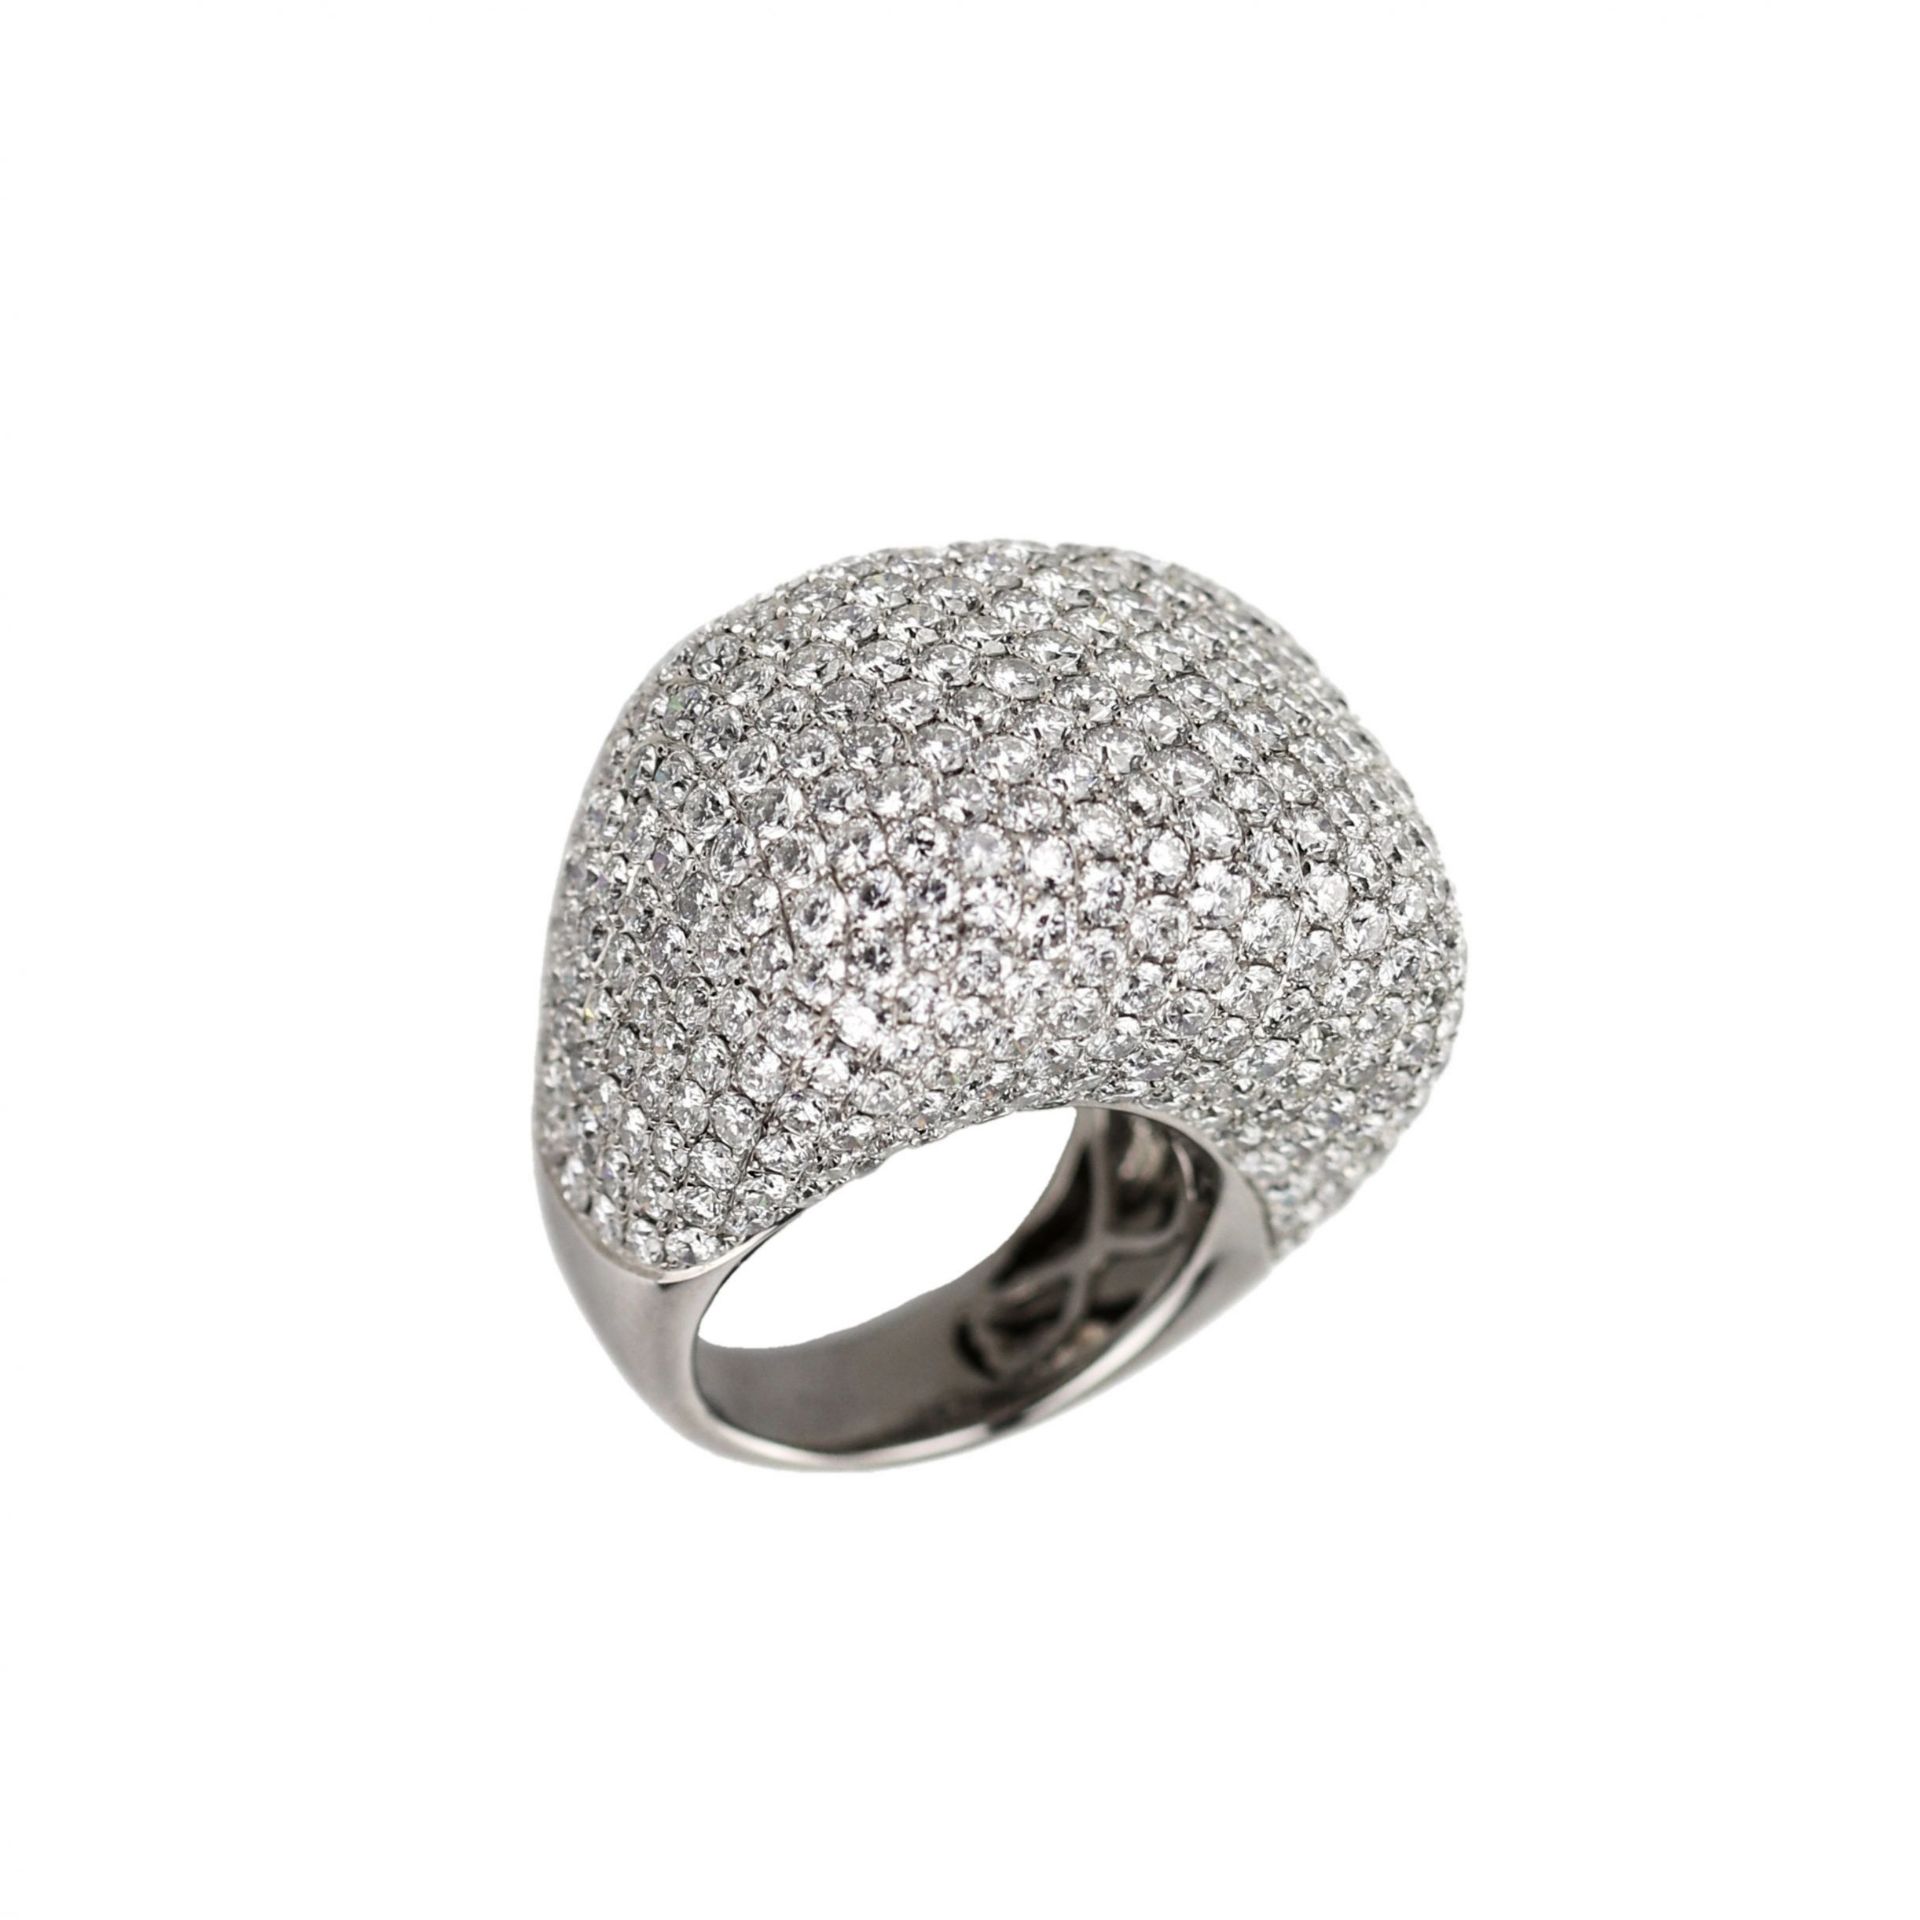 Gold, cocktail ring with diamonds. - Image 2 of 7